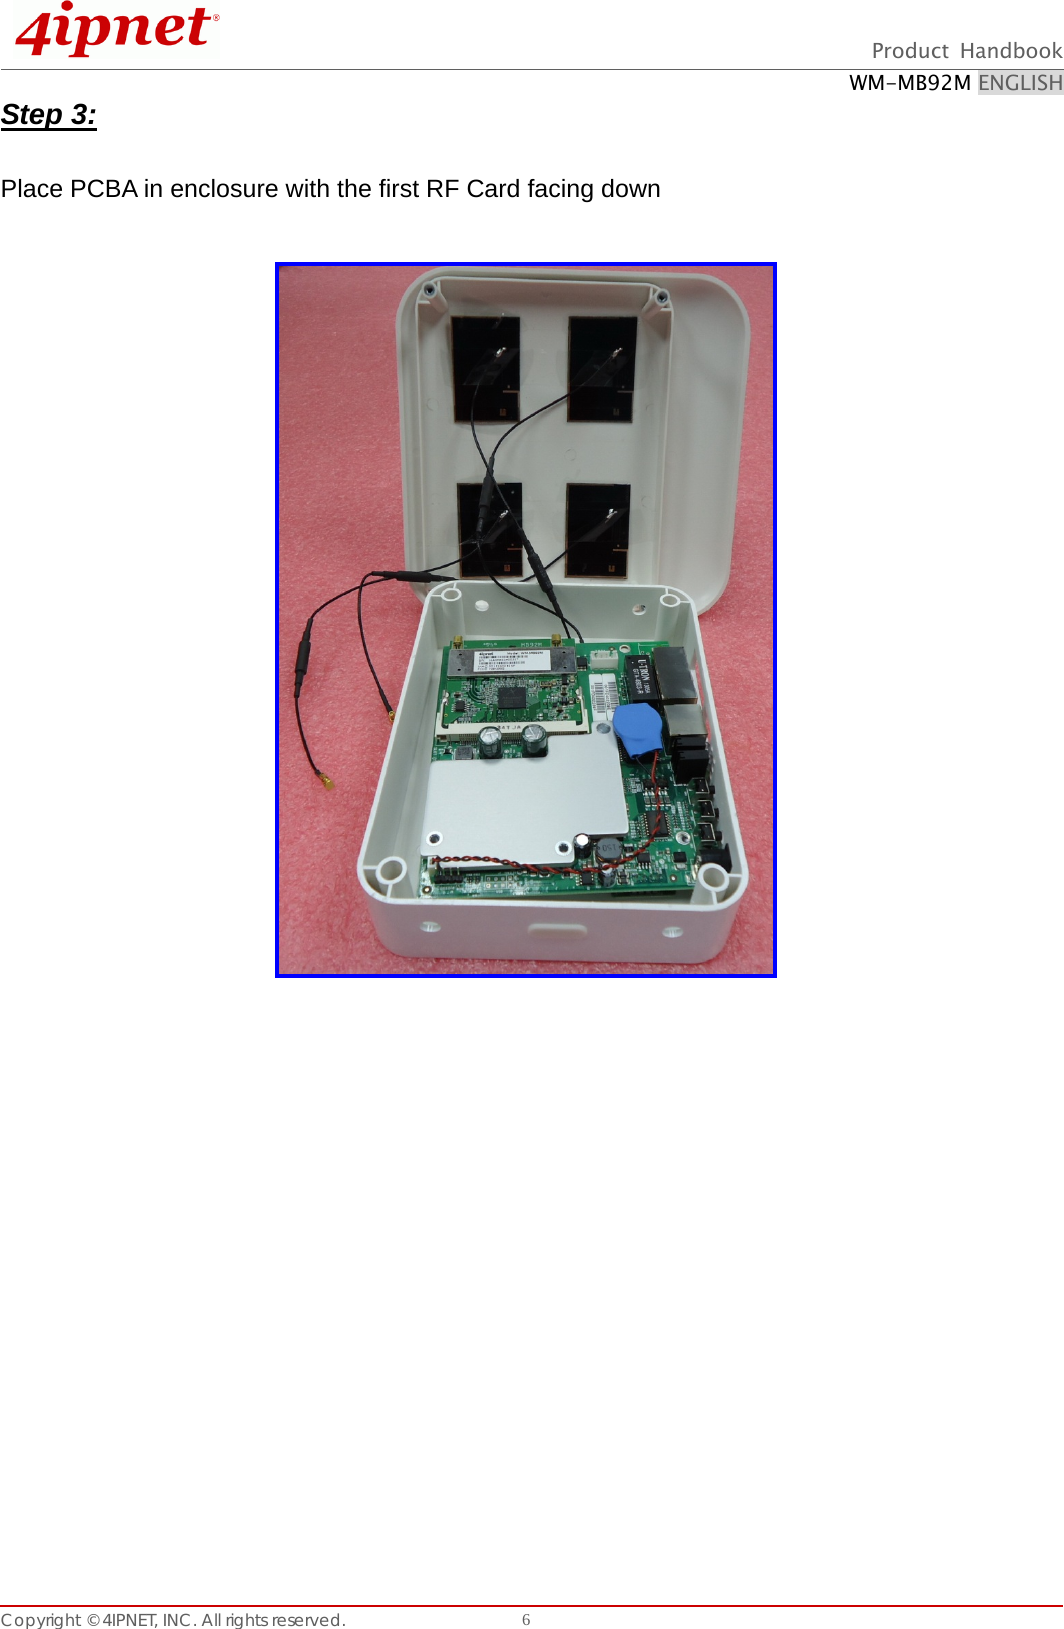  Product Handbook WM-MB92M ENGLISH Copyright © 4IPNET, INC. All rights reserved.    6Step 3:  Place PCBA in enclosure with the first RF Card facing down                  